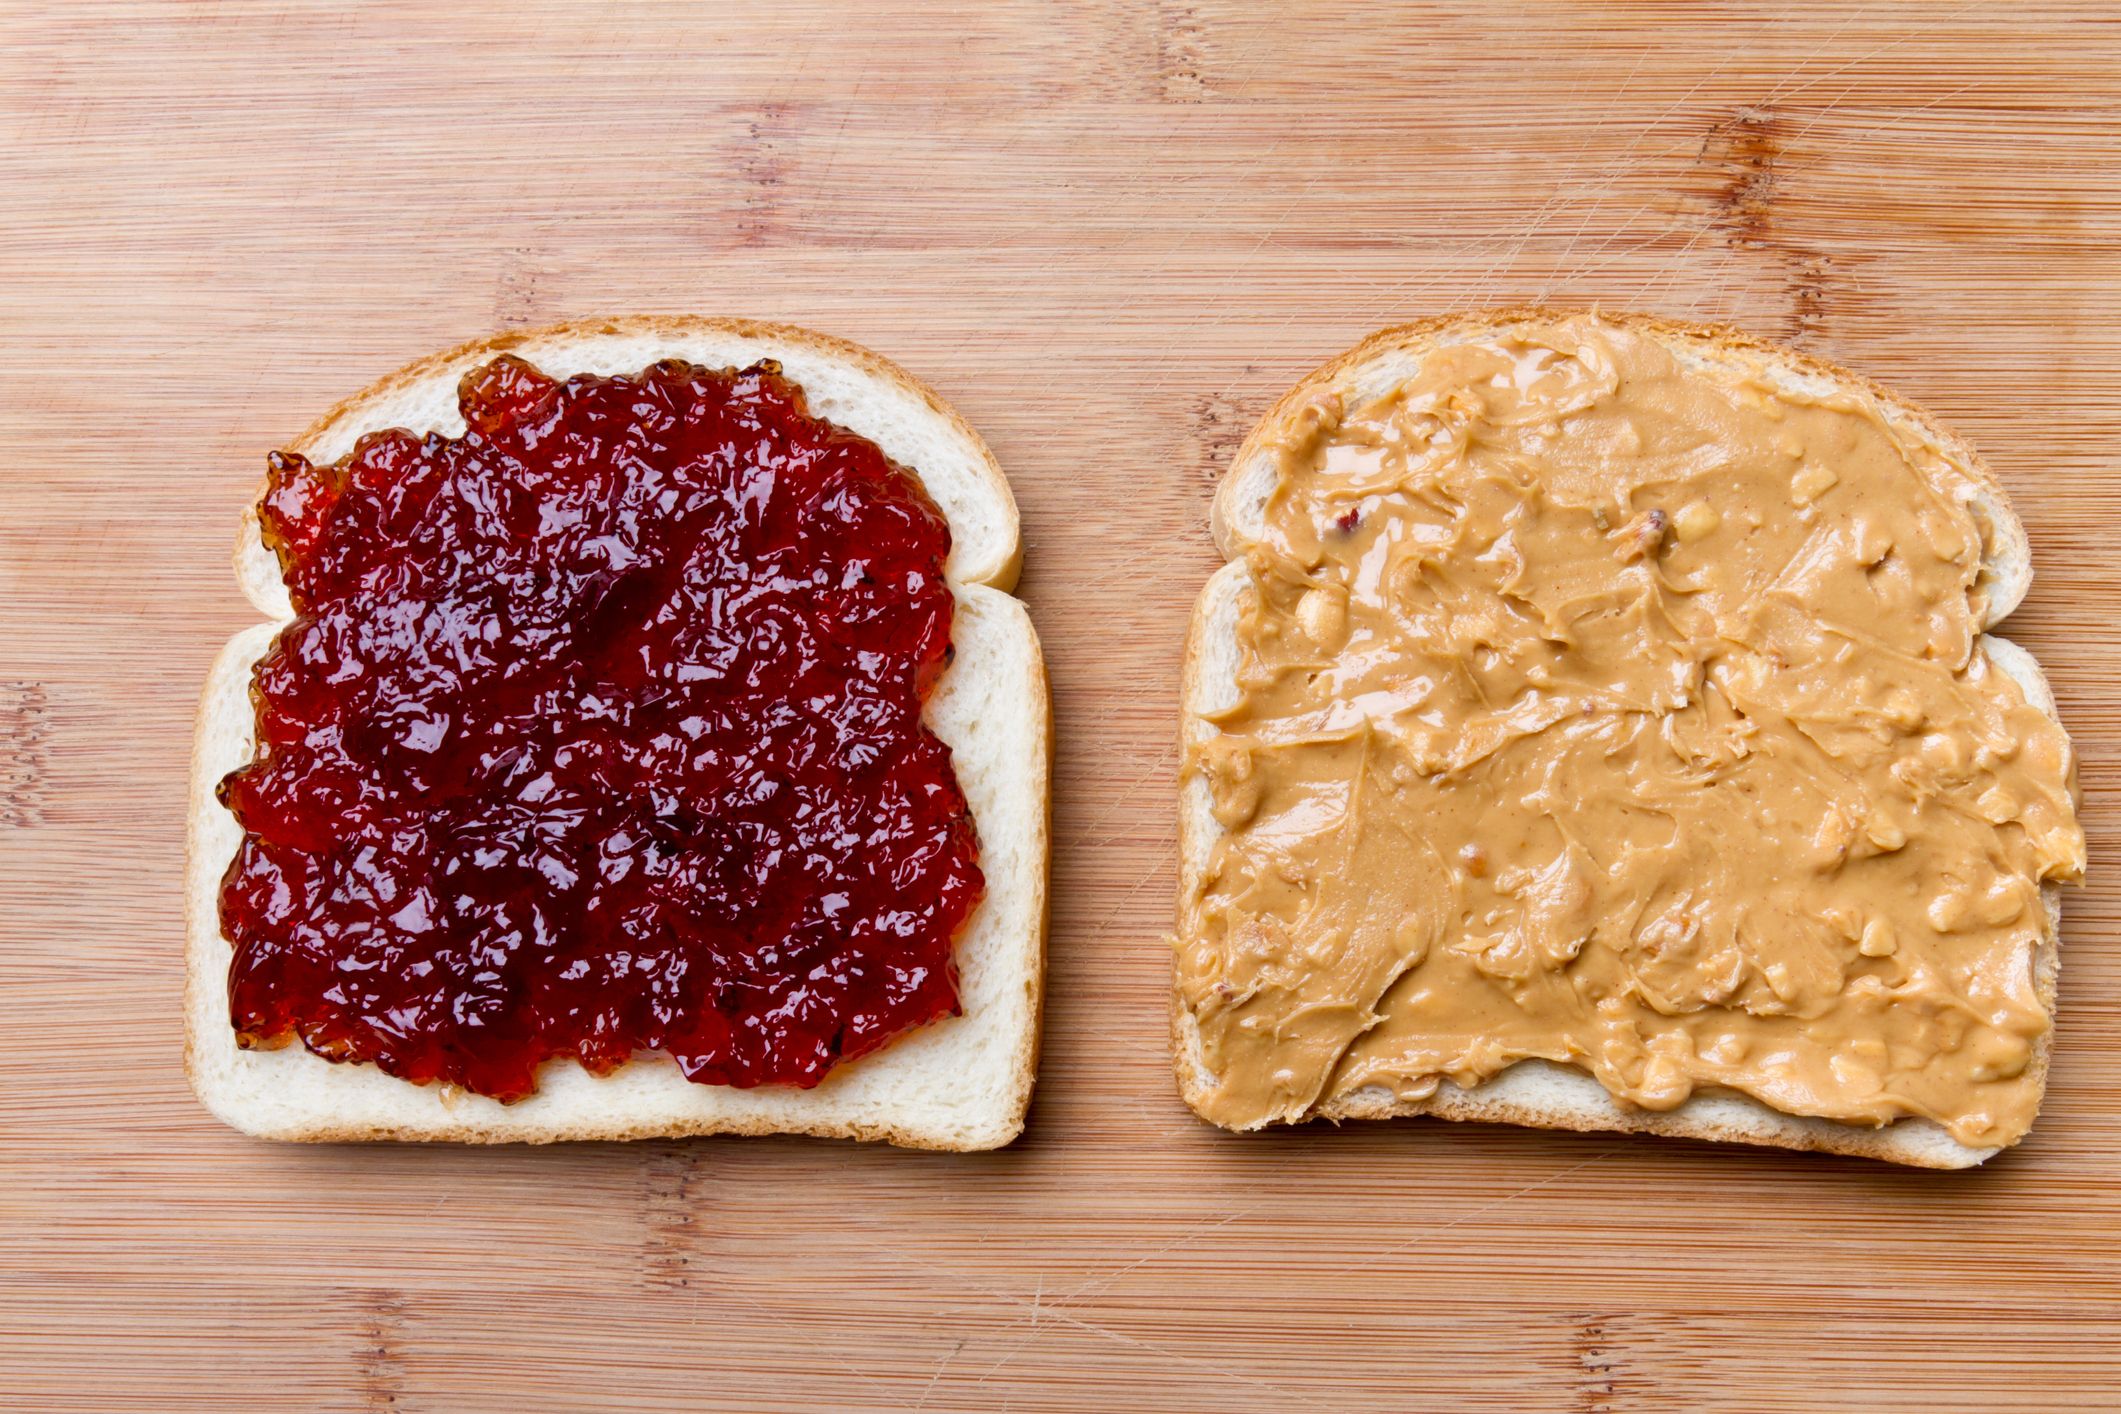 What is the difference between peanut butter and jam